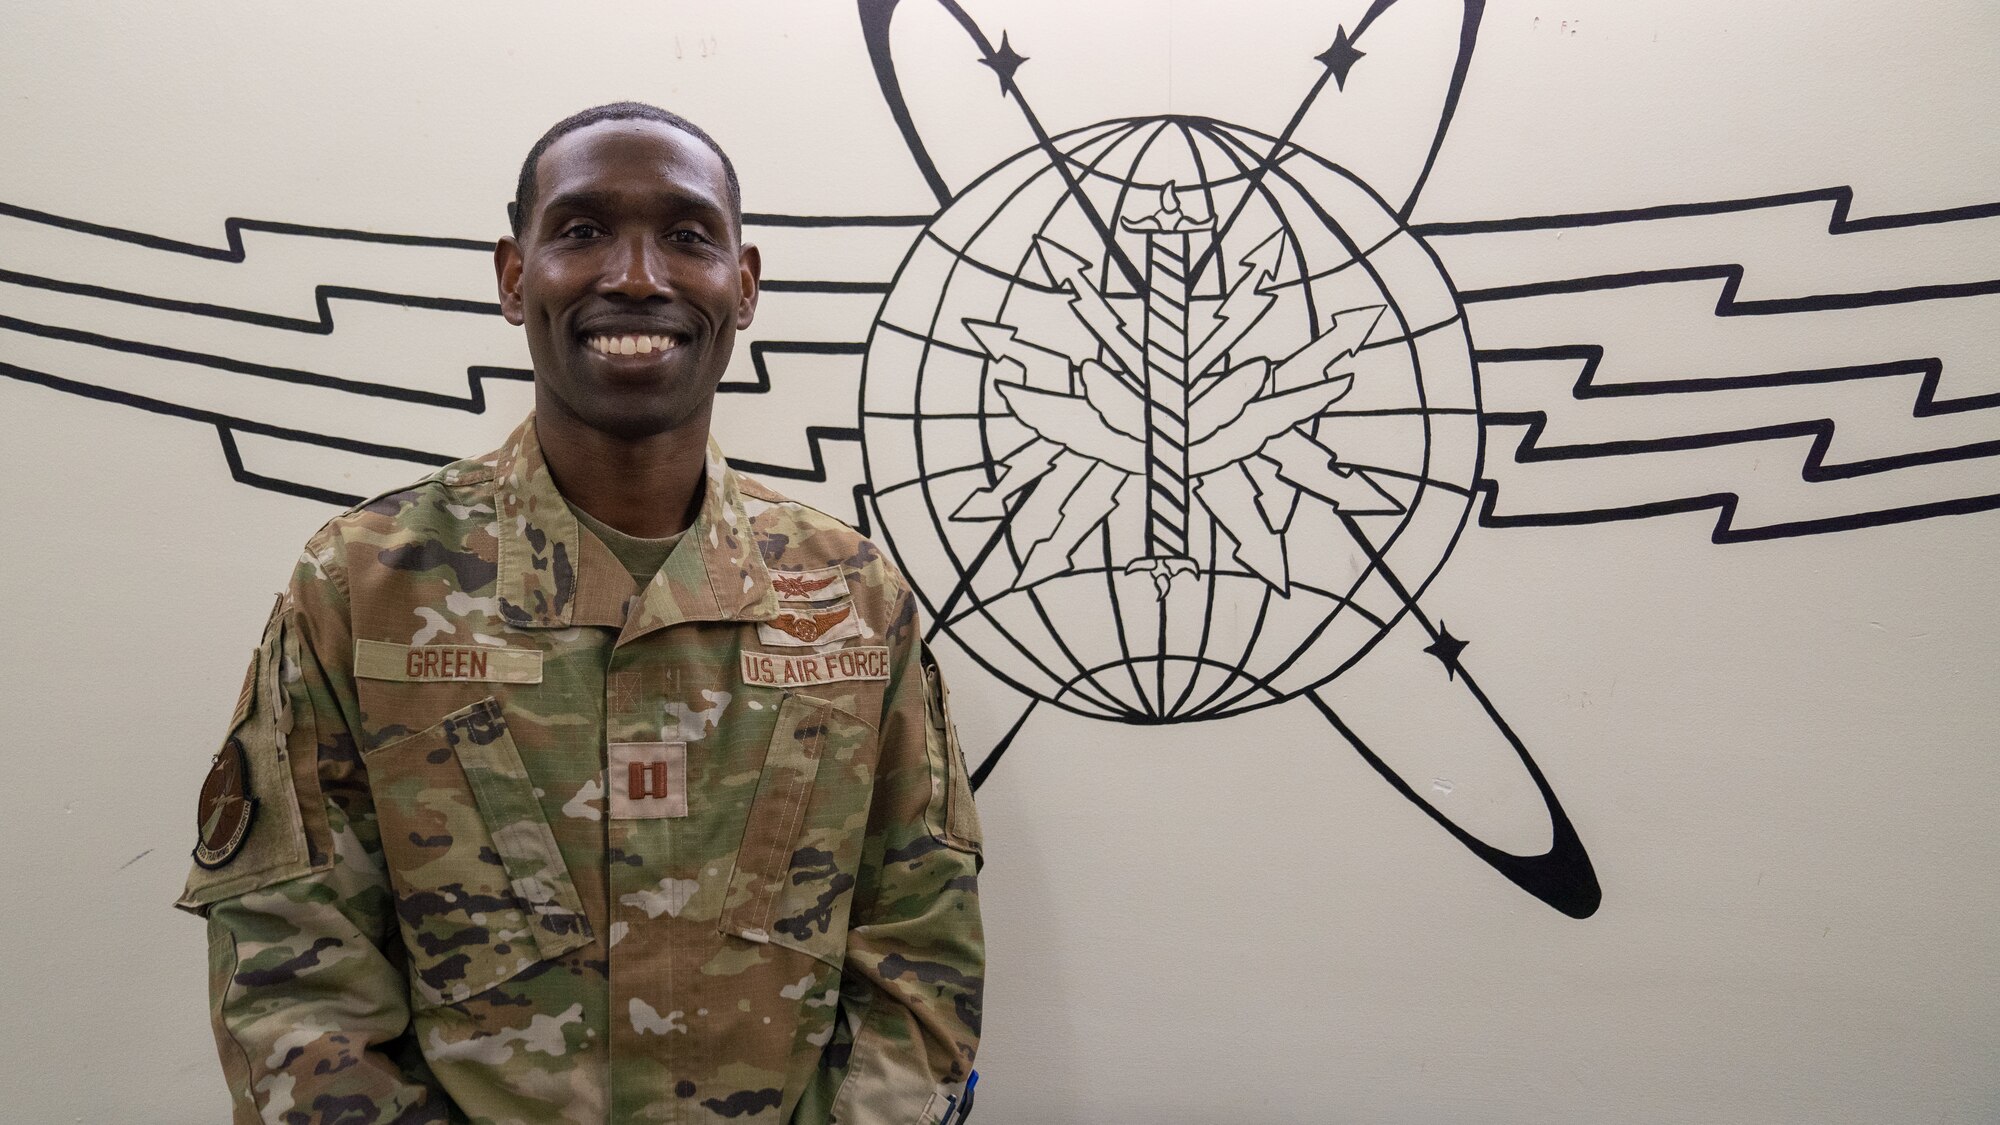 U.S. Air Force Capt. Armand Green, 333rd Training Squadron instructor supervisor, poses for a photo at Stennis Hall on Keesler Air Force Base, Mississippi, July 13, 2023. The 333rd TRS teaches Undergraduate Cyber Training, Cyber Warfare Operations, IT Fundamentals and Spectrum Operations. (U.S. Air Force photo by Senior Airman Kimberly L. Touchet)